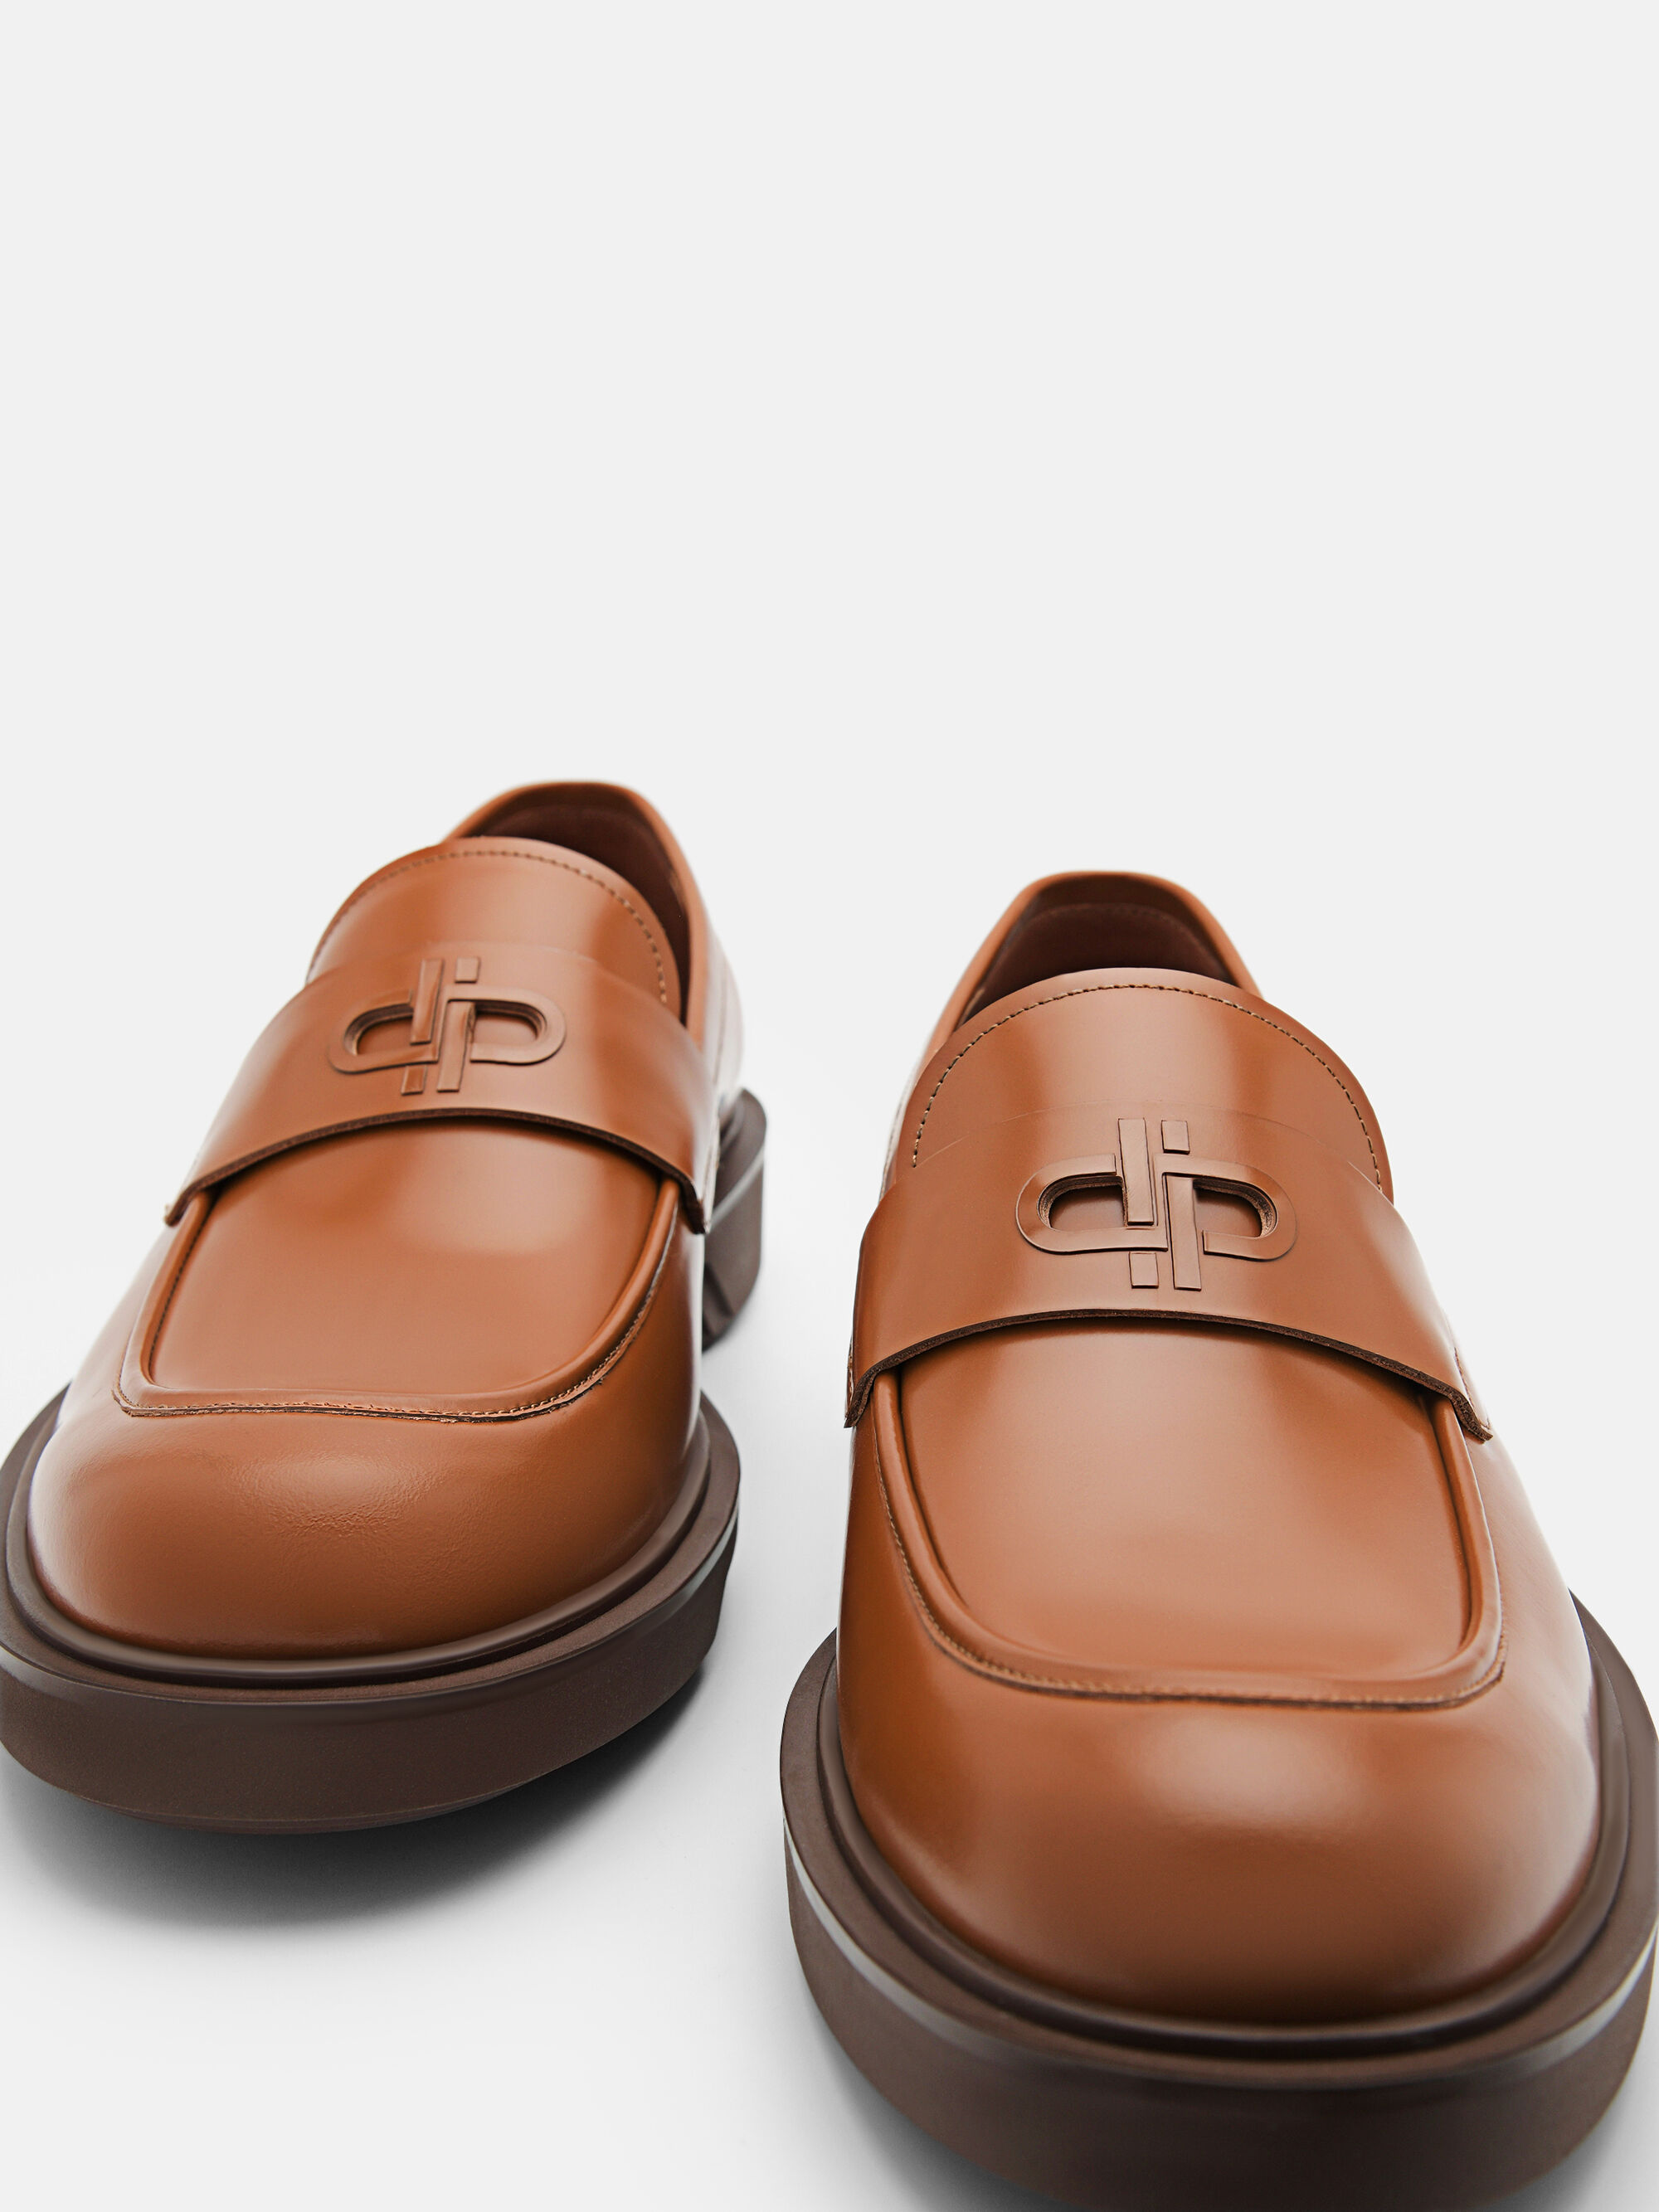 PEDRO Icon Loop Leather Penny Loafers, Cognac